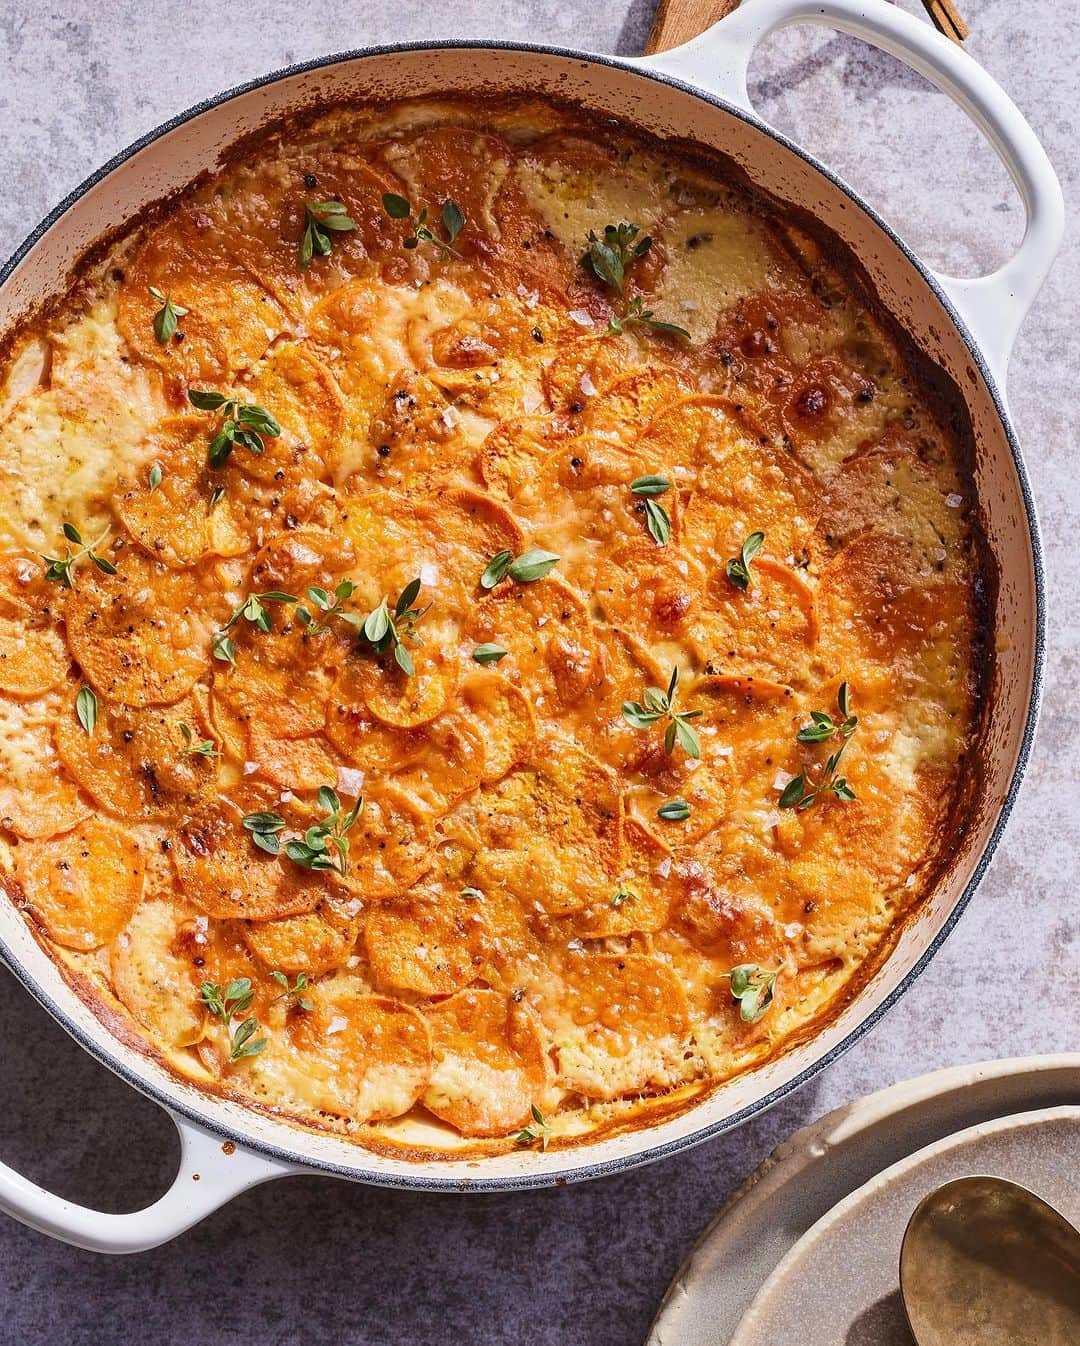 Gaby Dalkinのインスタグラム：「All about that Au Gratin life these days! Sweet Potato Gratin and a tradition Au Gratin are both up on WGC and honestly, you should make them BOTH for thanksgiving 💛 https://whatsgabycooking.com/sweet-potato-gratin/」